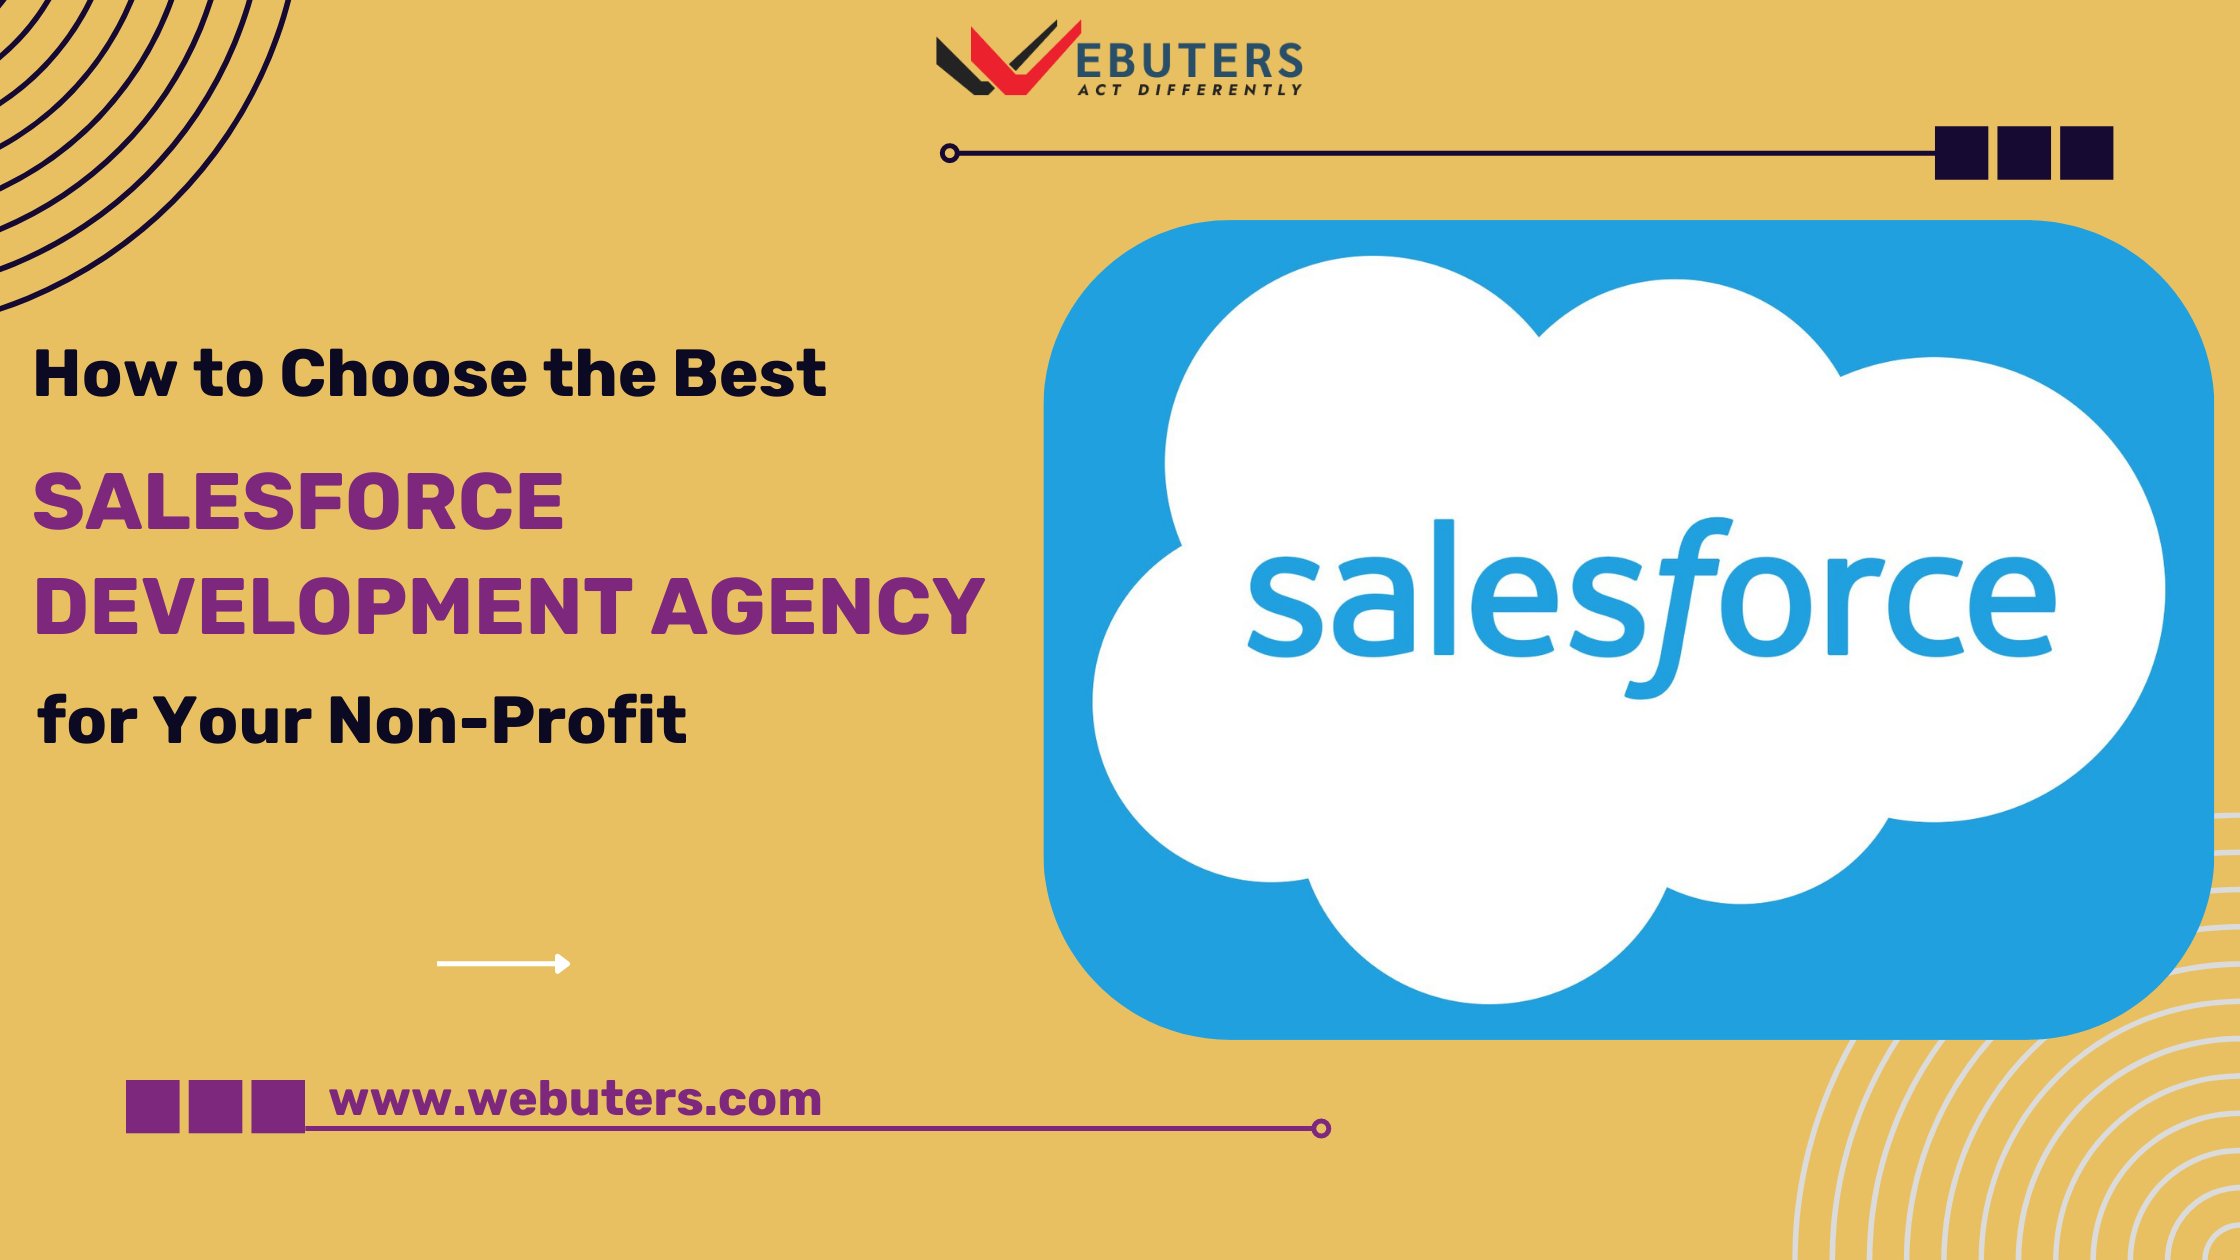 How to Choose the Best Salesforce Development Agency for Your Non-Profit